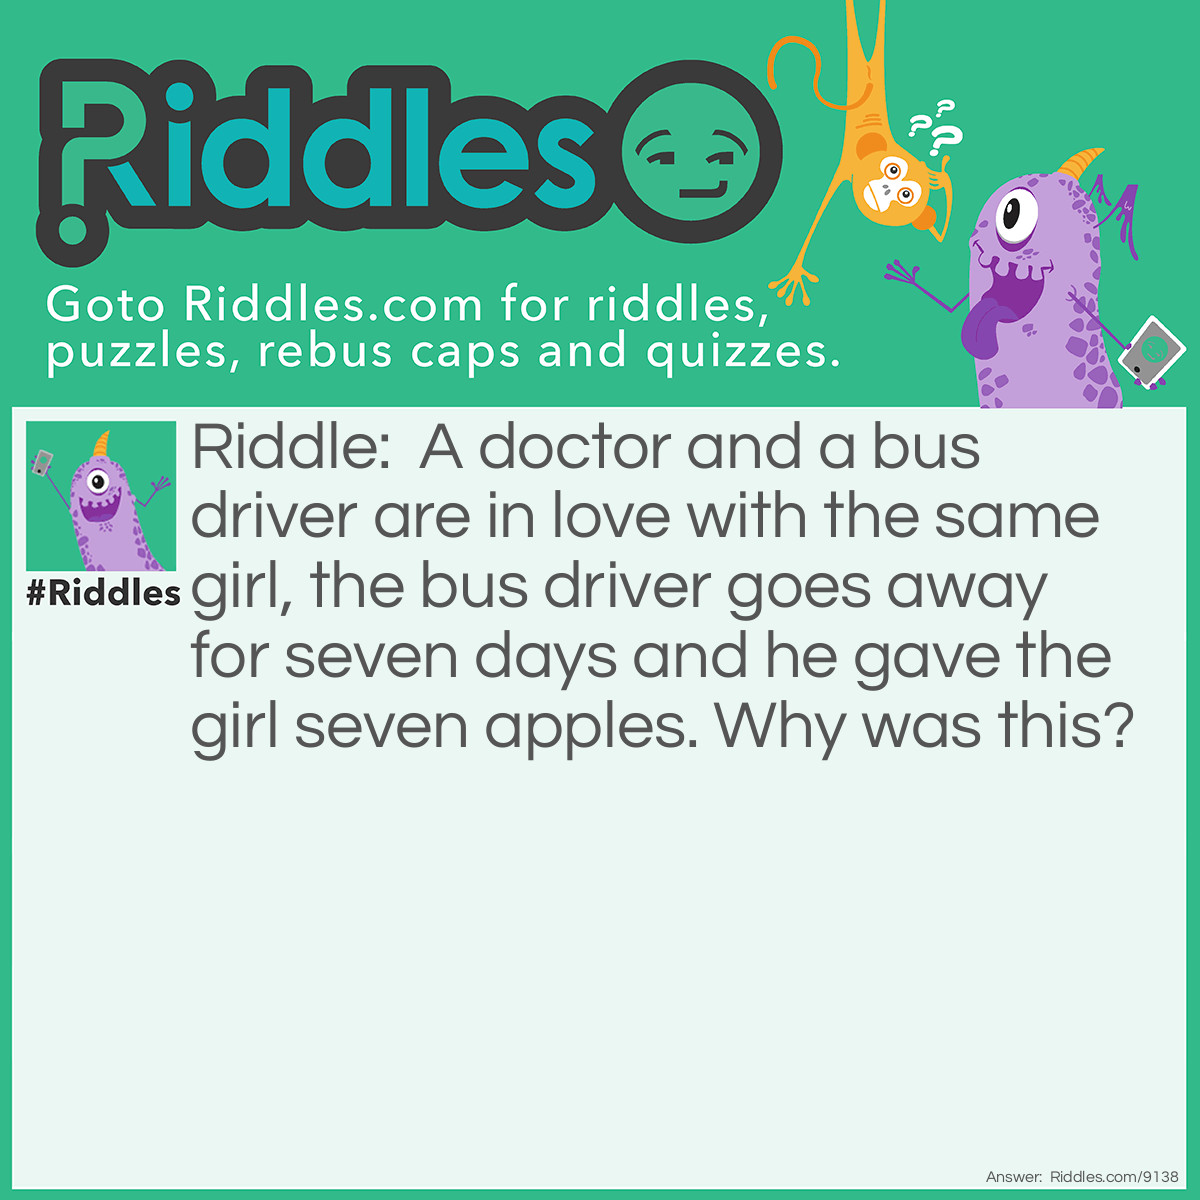 Riddle: A doctor and a bus driver are in love with the same girl, the bus driver goes away for seven days and he gave the girl seven apples. Why was this? Answer: An apple a day keeps the doctor away